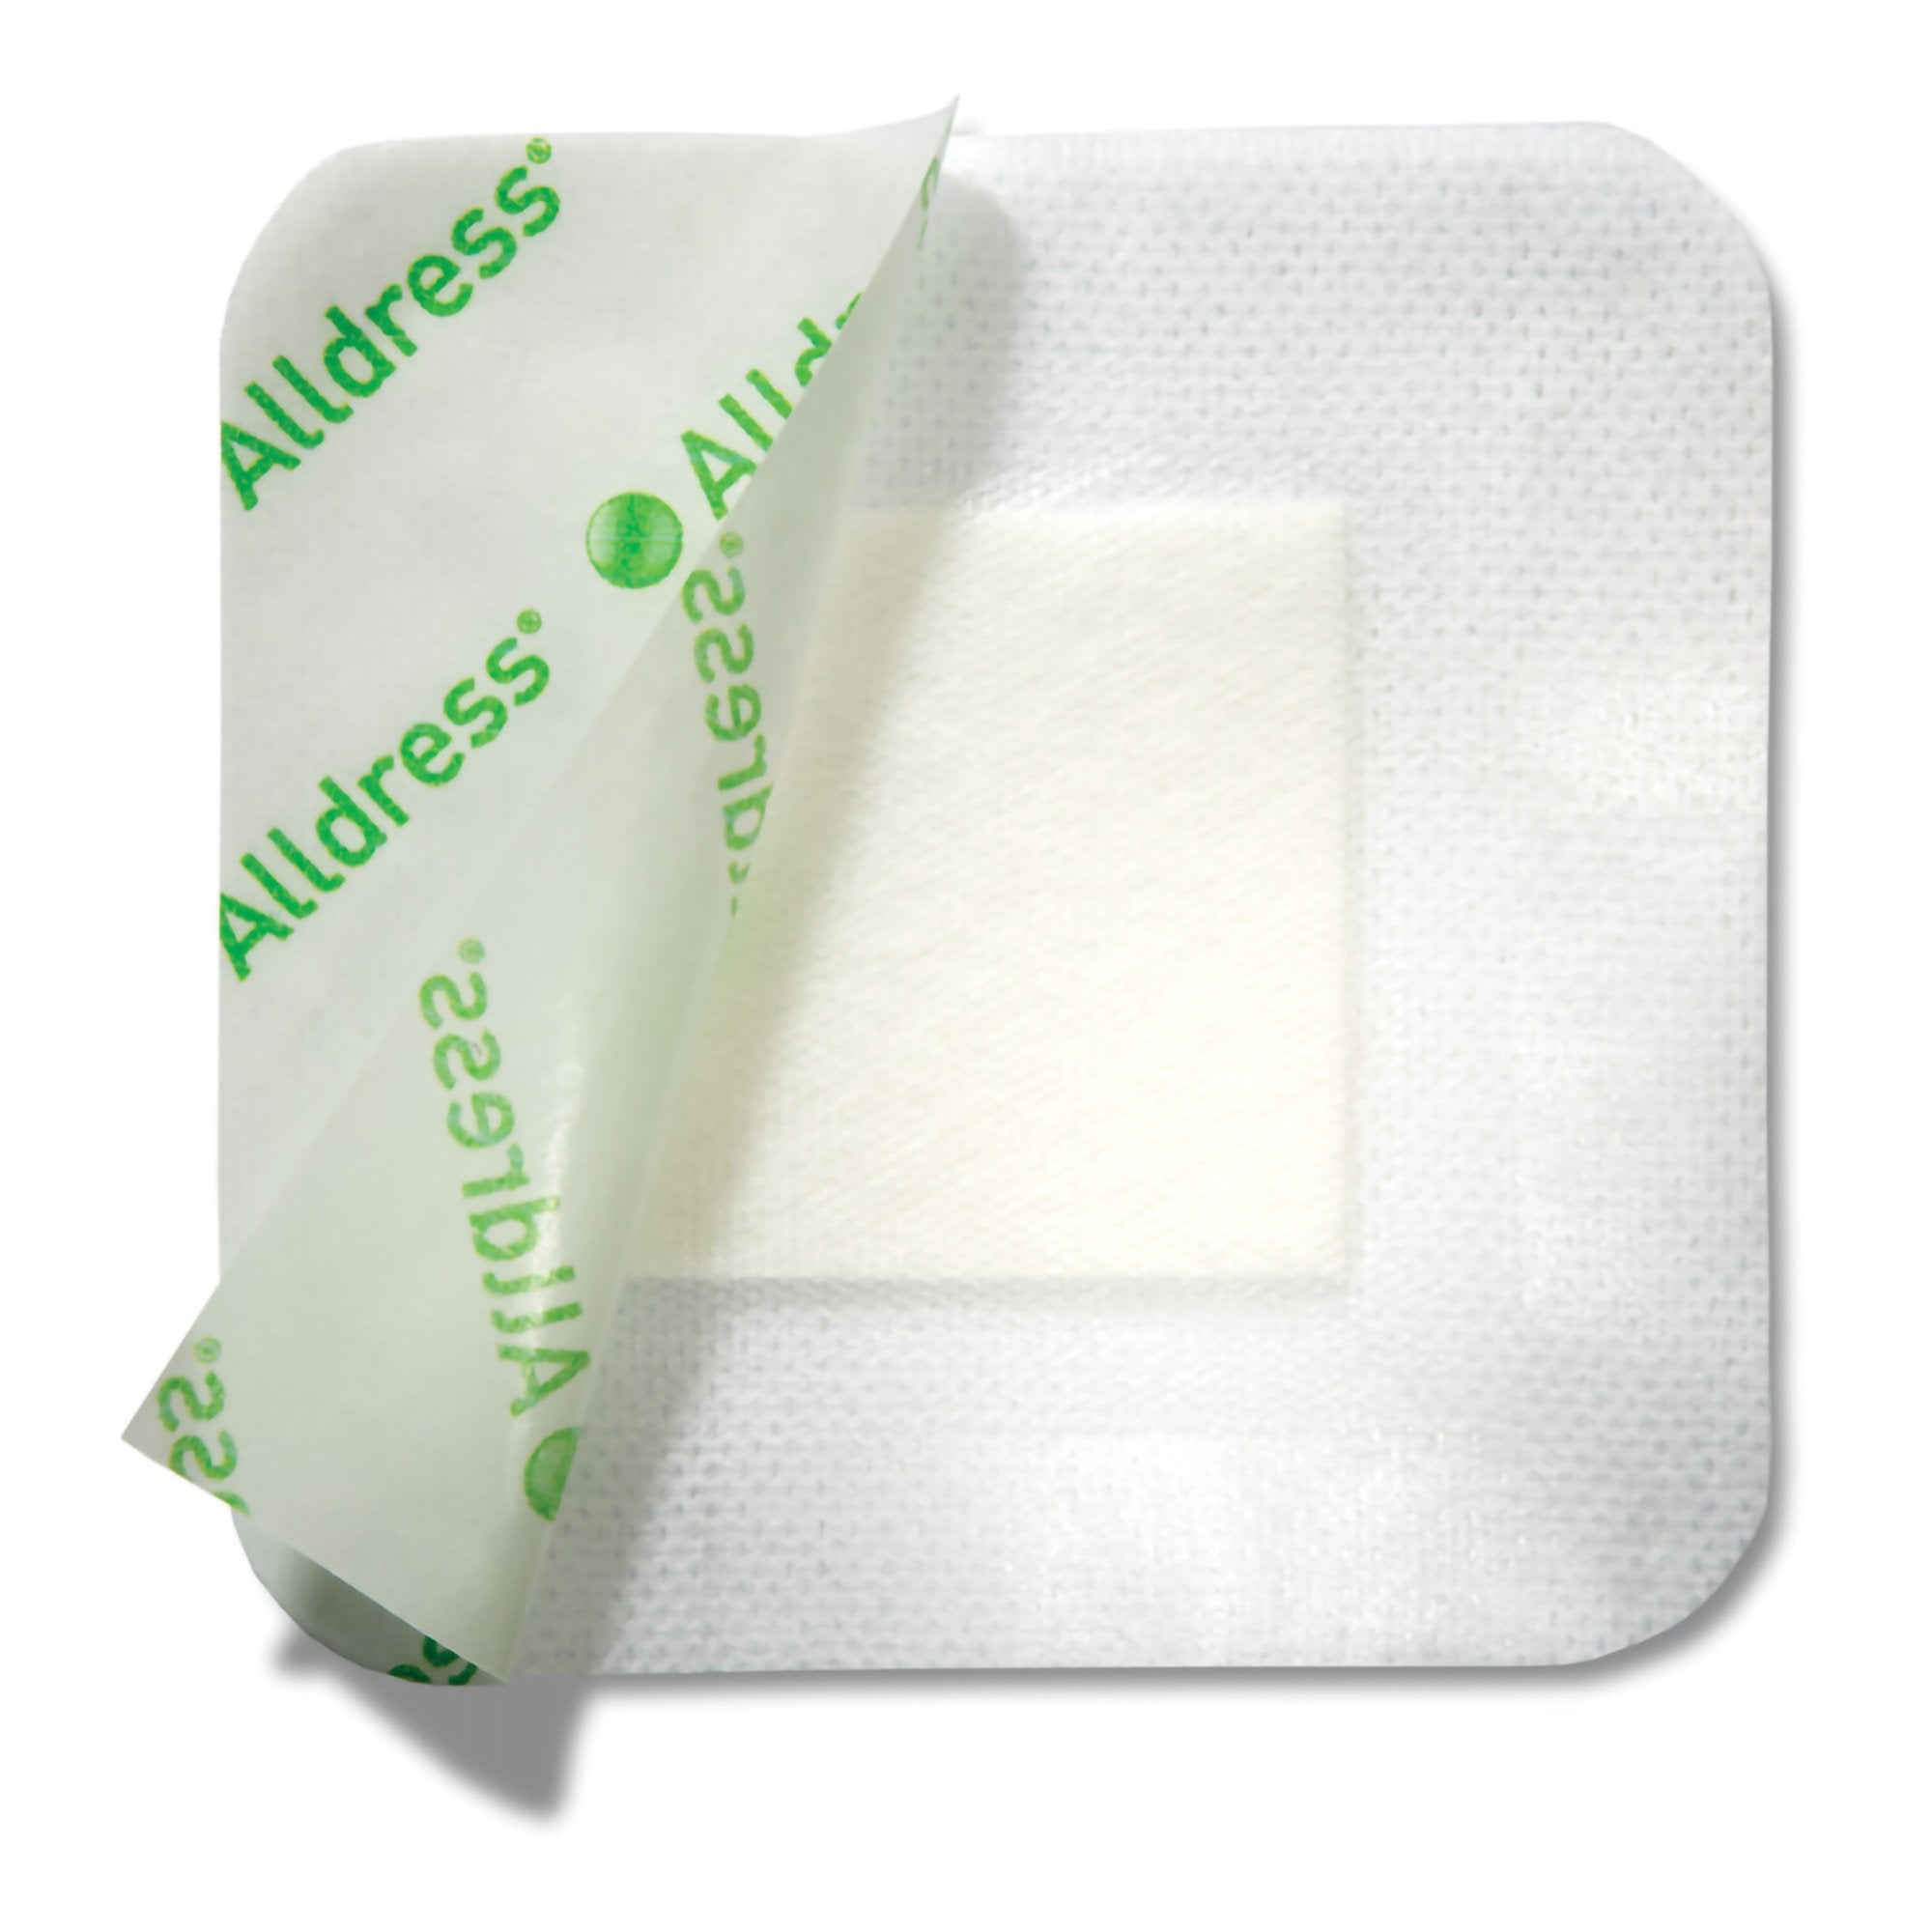 Composite Dressing Alldress® 6 X 8 Inch Rectangle Sterile